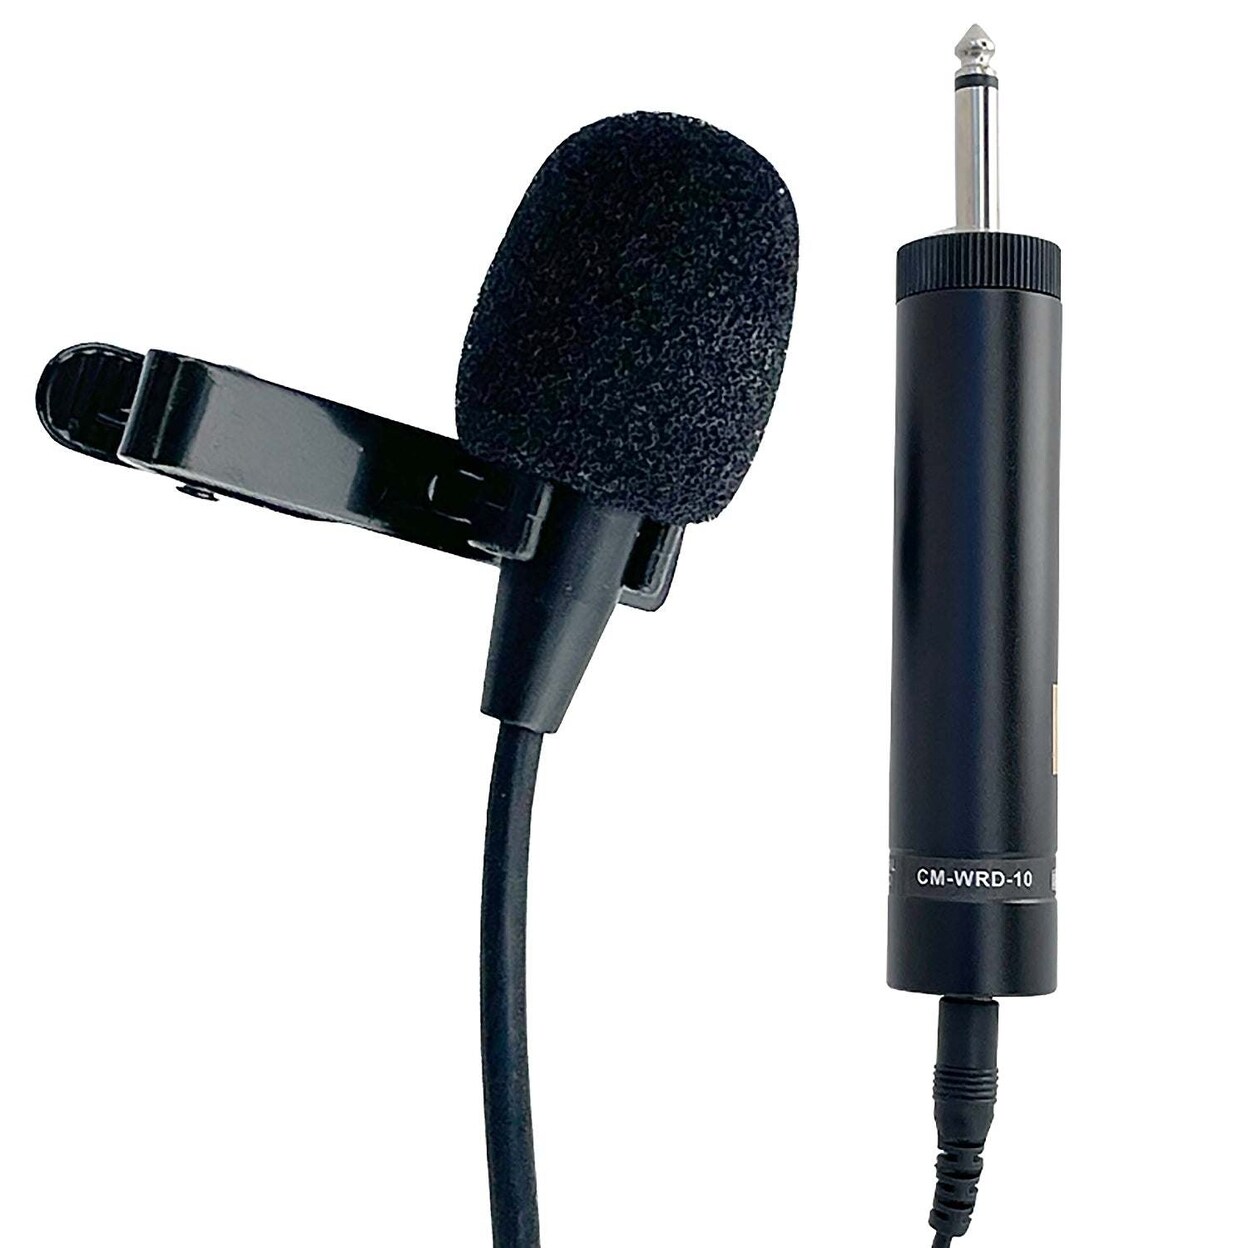 SKUSHOPS Mic Lavalier Microphone Mini Wired Clip